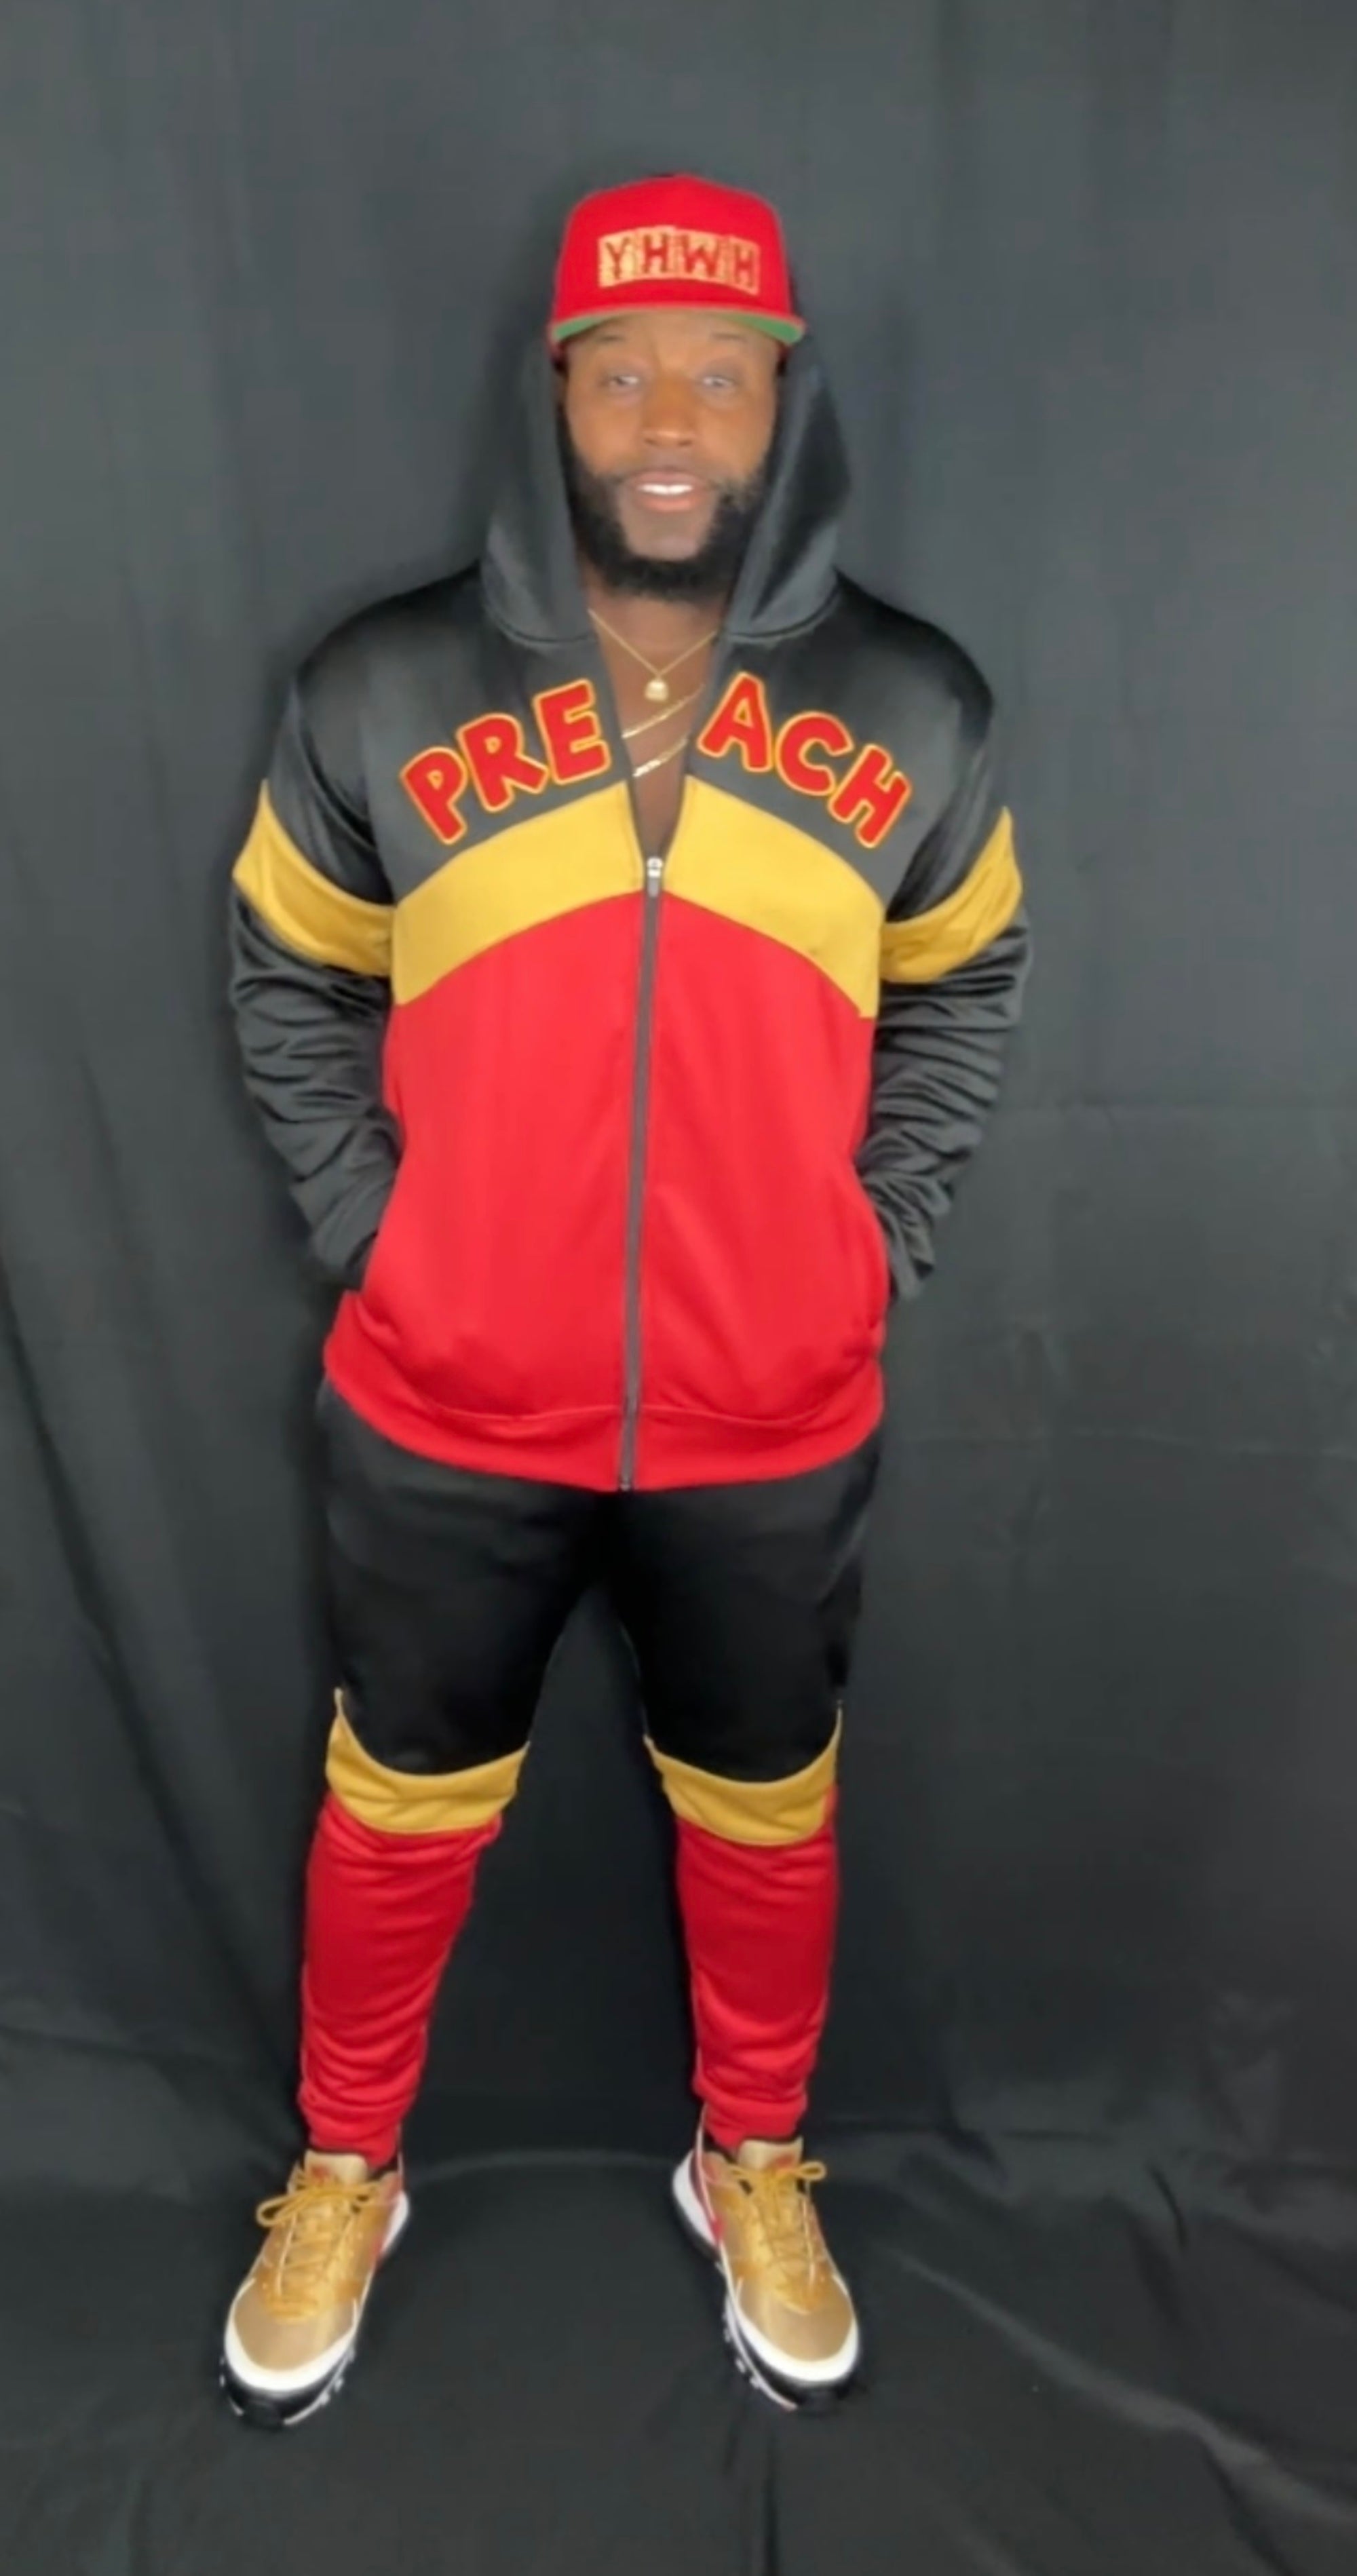 Preach Tracksuit Black/Red/Gold 100% Poly Tricot